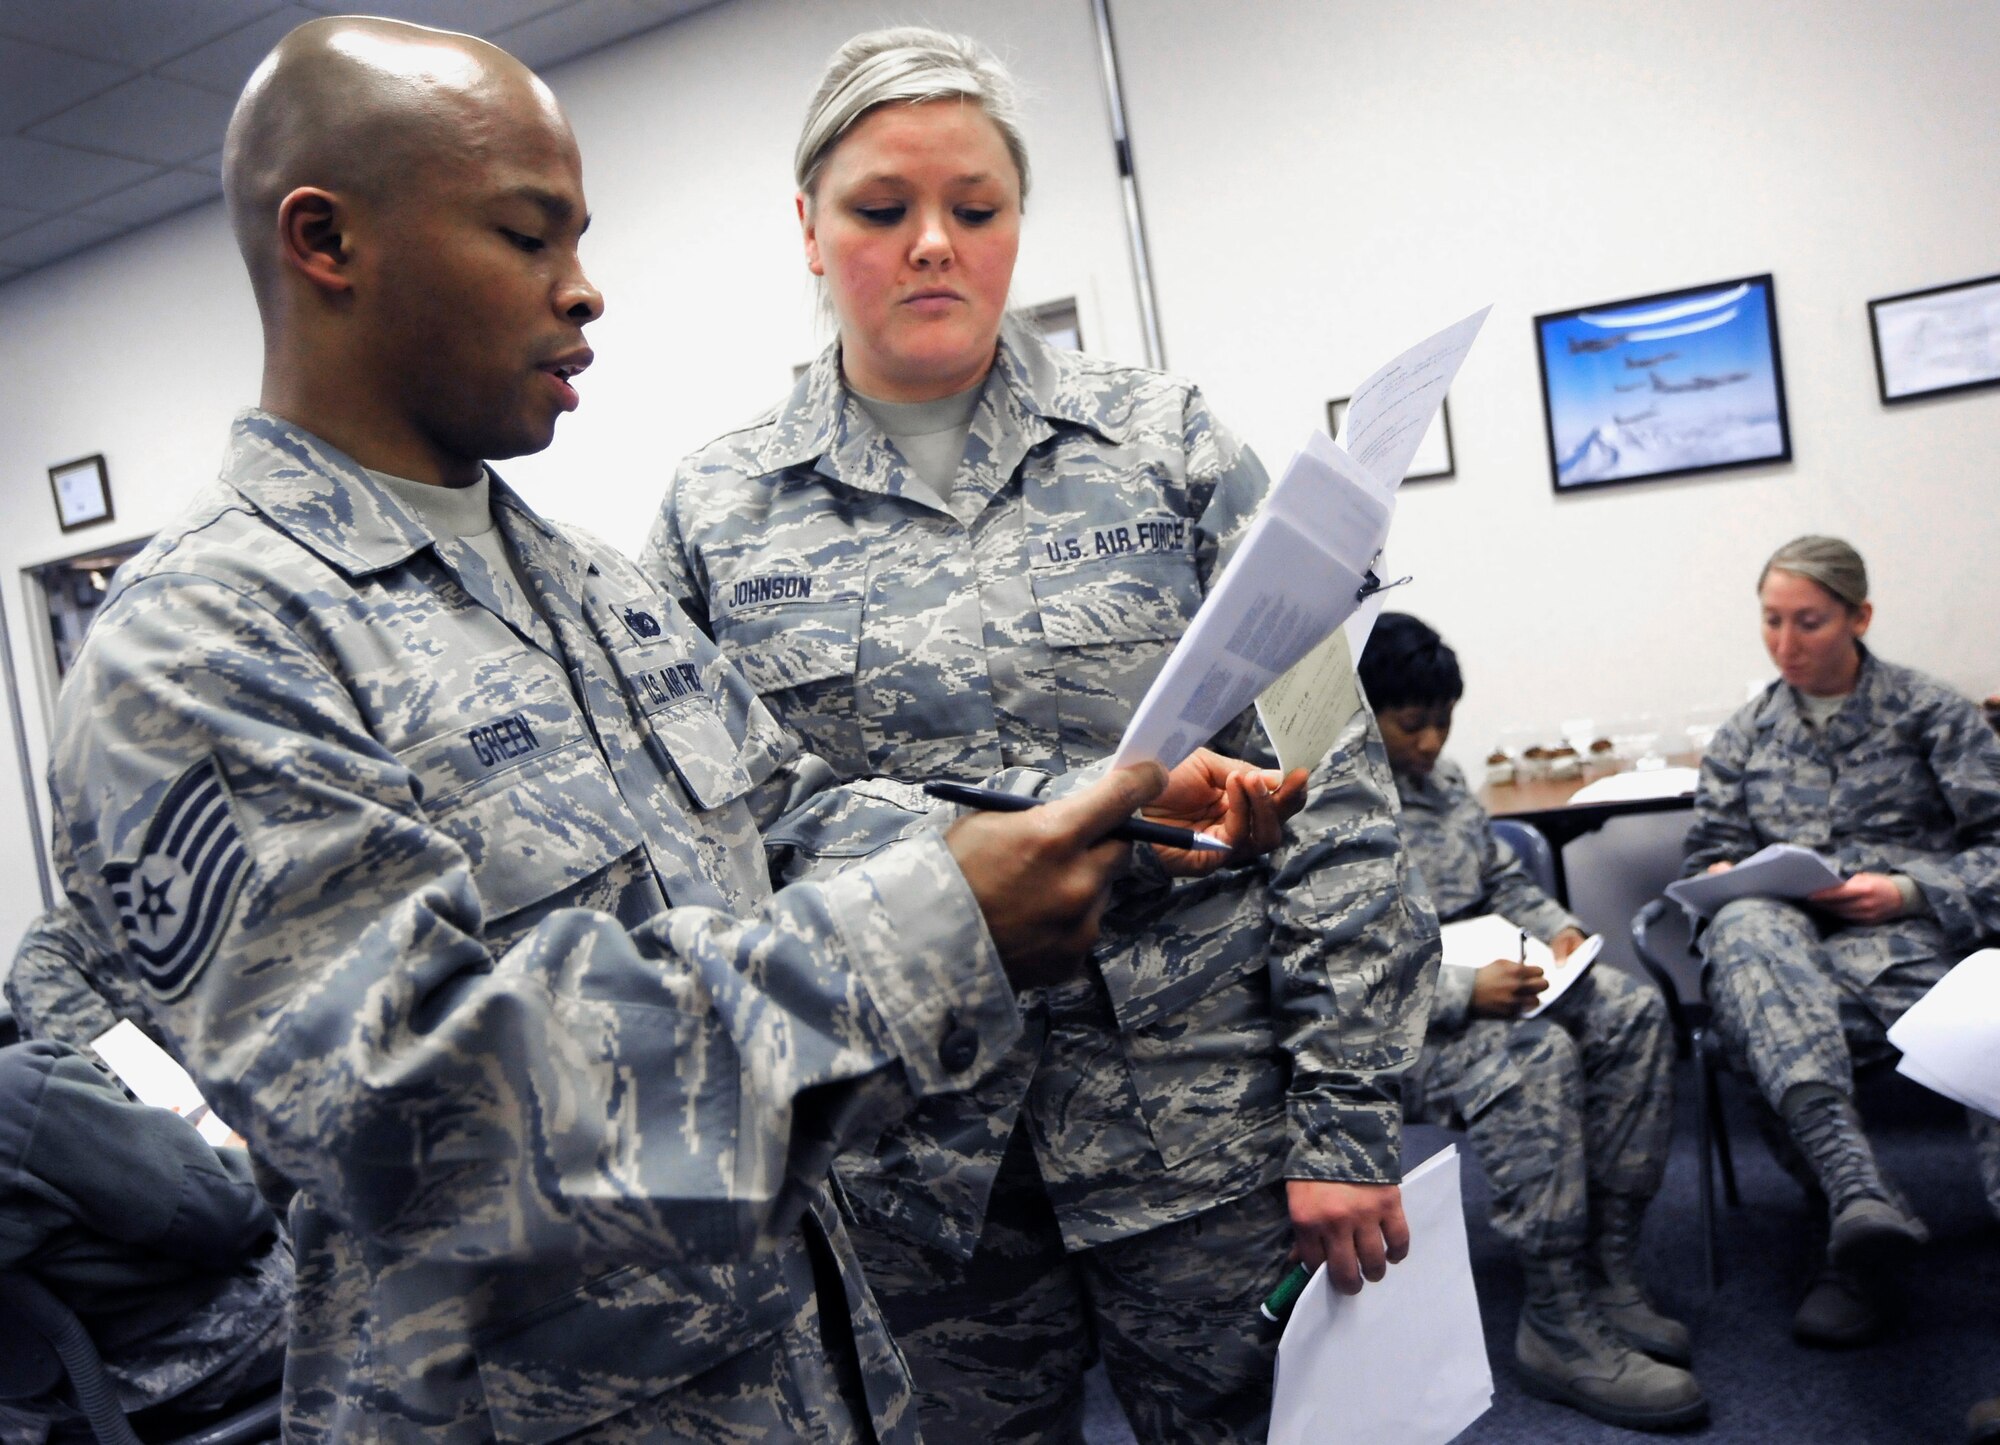 Oregon Air National Guard Tech. Sgt. Carl Green and Airman 1st Class Michelle Johnson, 142nd Fighter Wing Diversity and Inclusion Counsel’s co-chairs review notes during a group activity as part of the monthly Unit Training Assembly weekend of events, Jan. 11, 2015, Portland Air National Guard Base, Ore. The Diversity and Inclusion Counsel helps foster communication by recognizing that a diverse set of experiences, perspectives, and backgrounds are crucial to mission success. (U.S. Air National Guard photo by Tech. Sgt. John Hughel, 142nd Fighter Wing Public Affairs/Released)